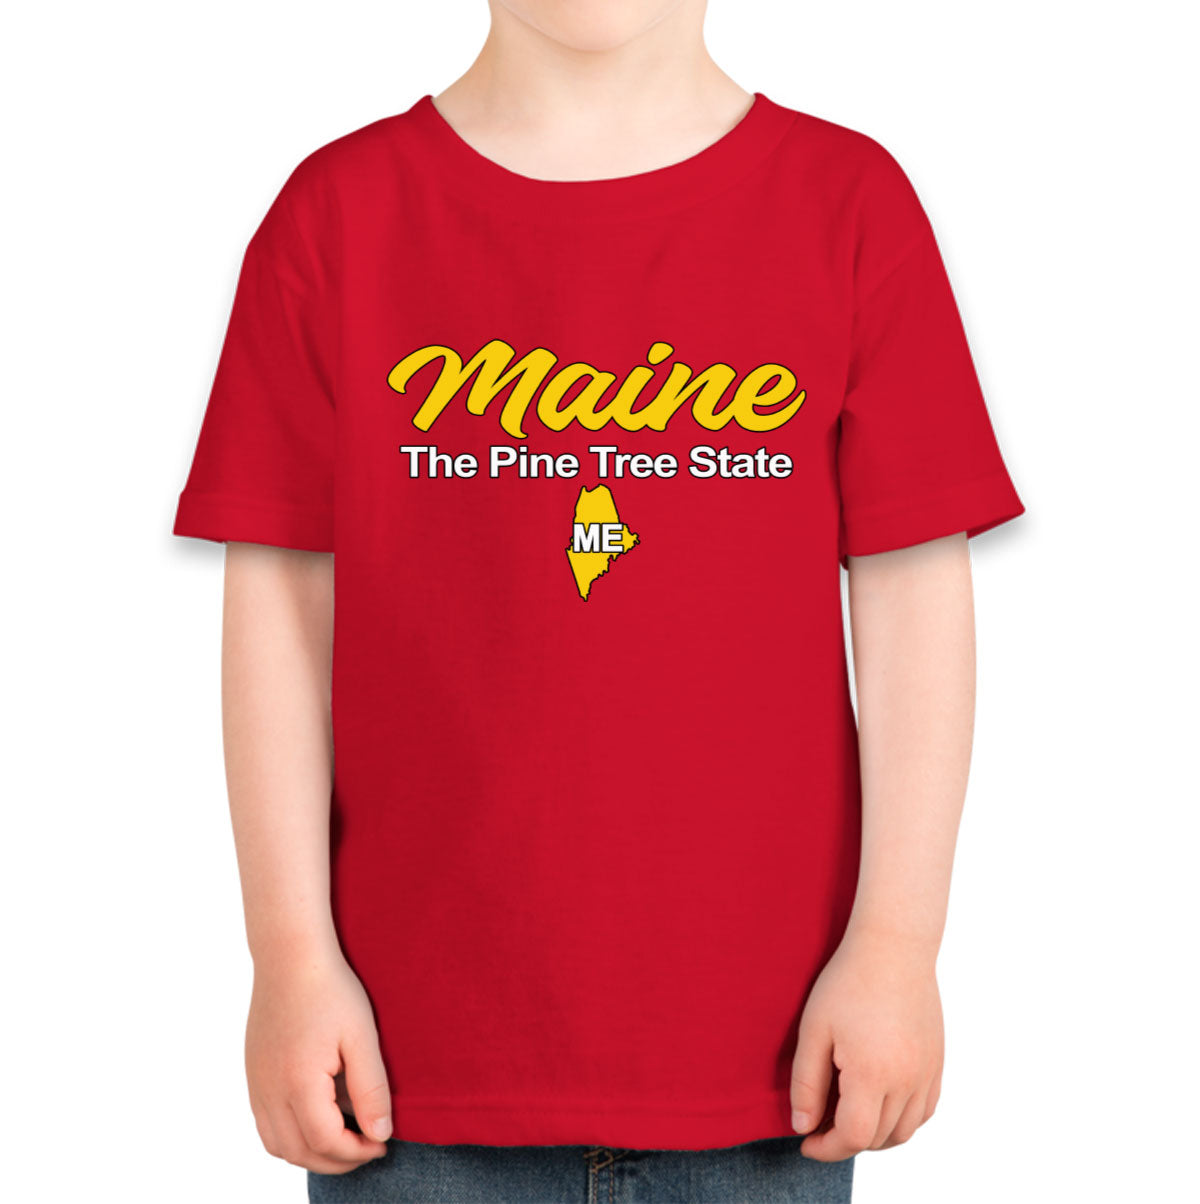 Maine The Pine Tree State Toddler T-shirt